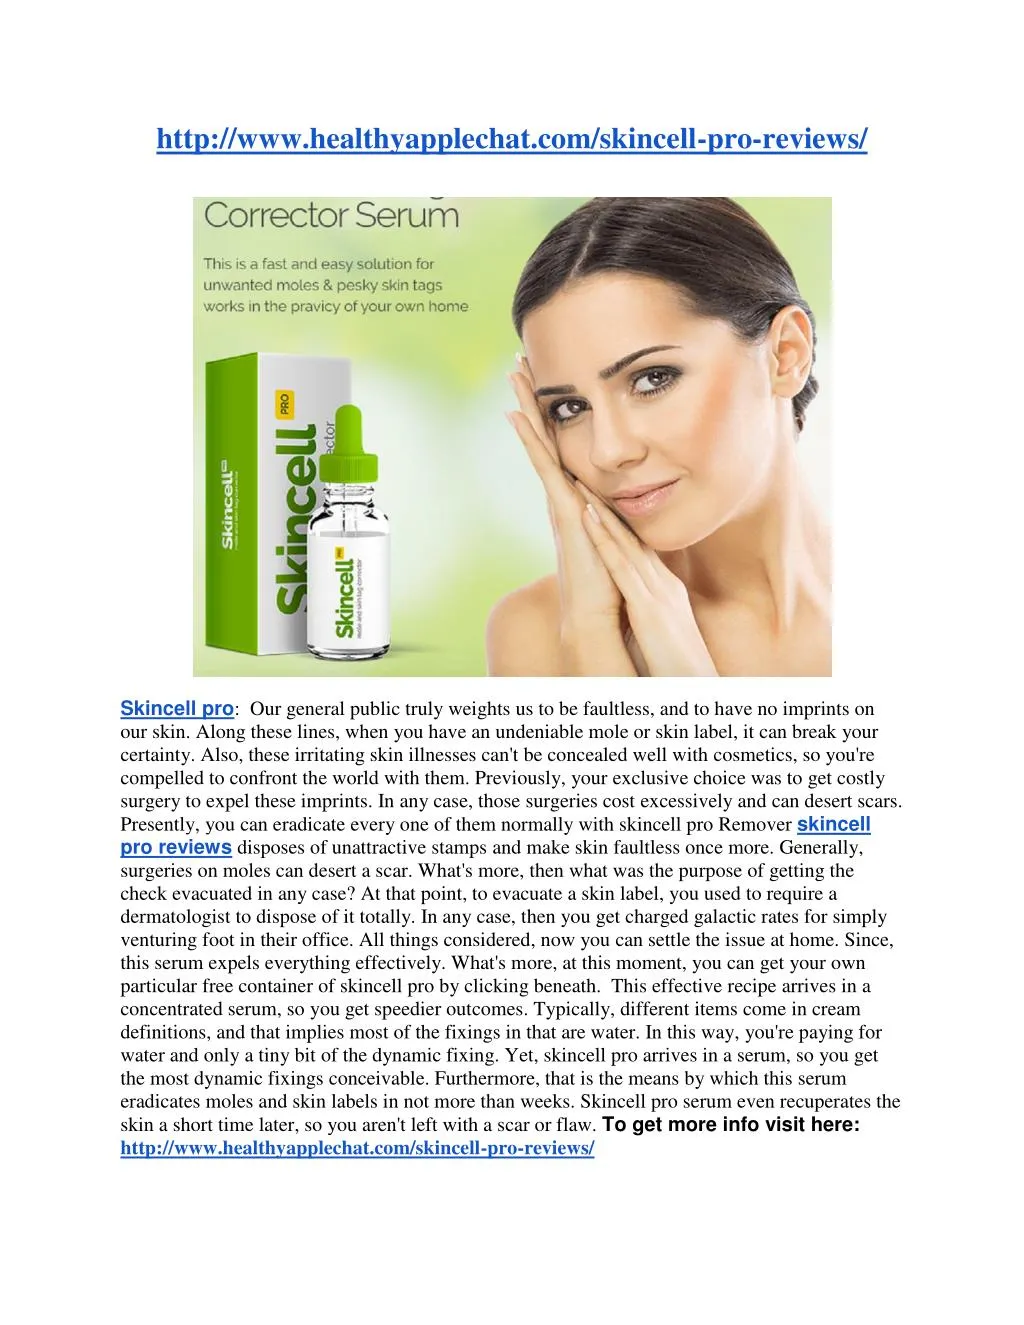 http www healthyapplechat com skincell pro reviews